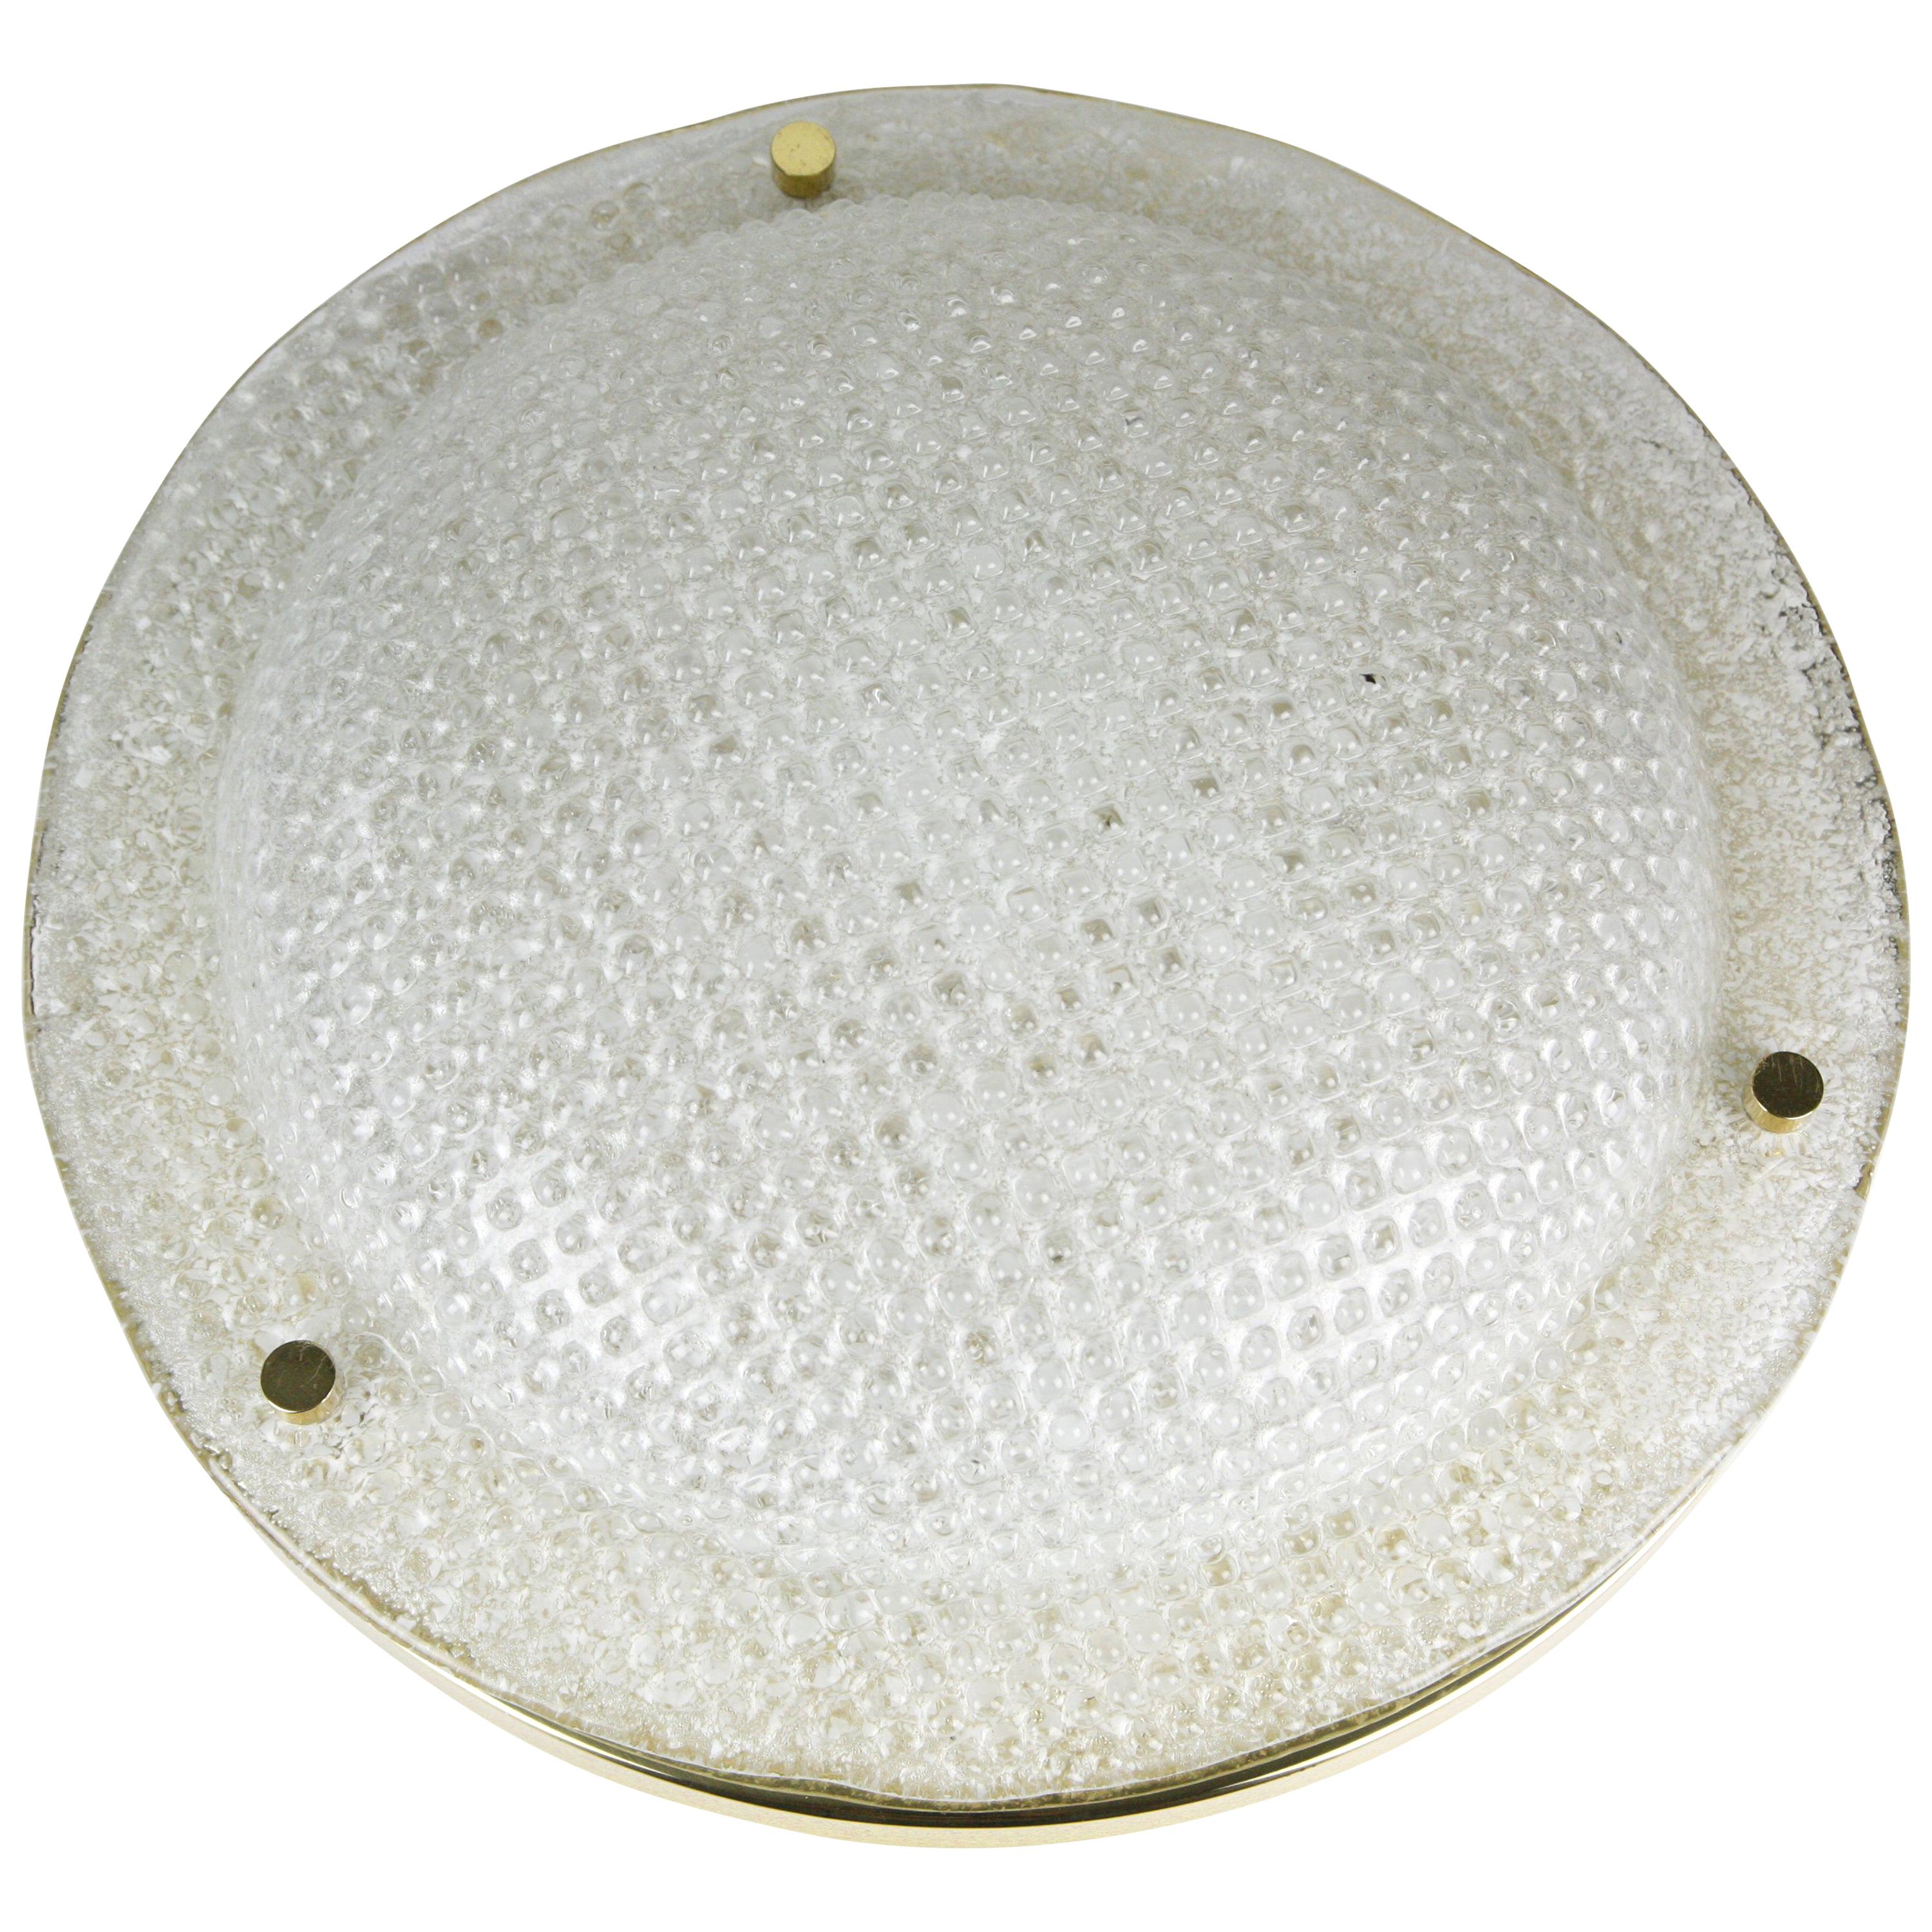 Dome shaped glass with waffle texture on a brass mount glass is lid up by four Edison ceramic sockets.
 